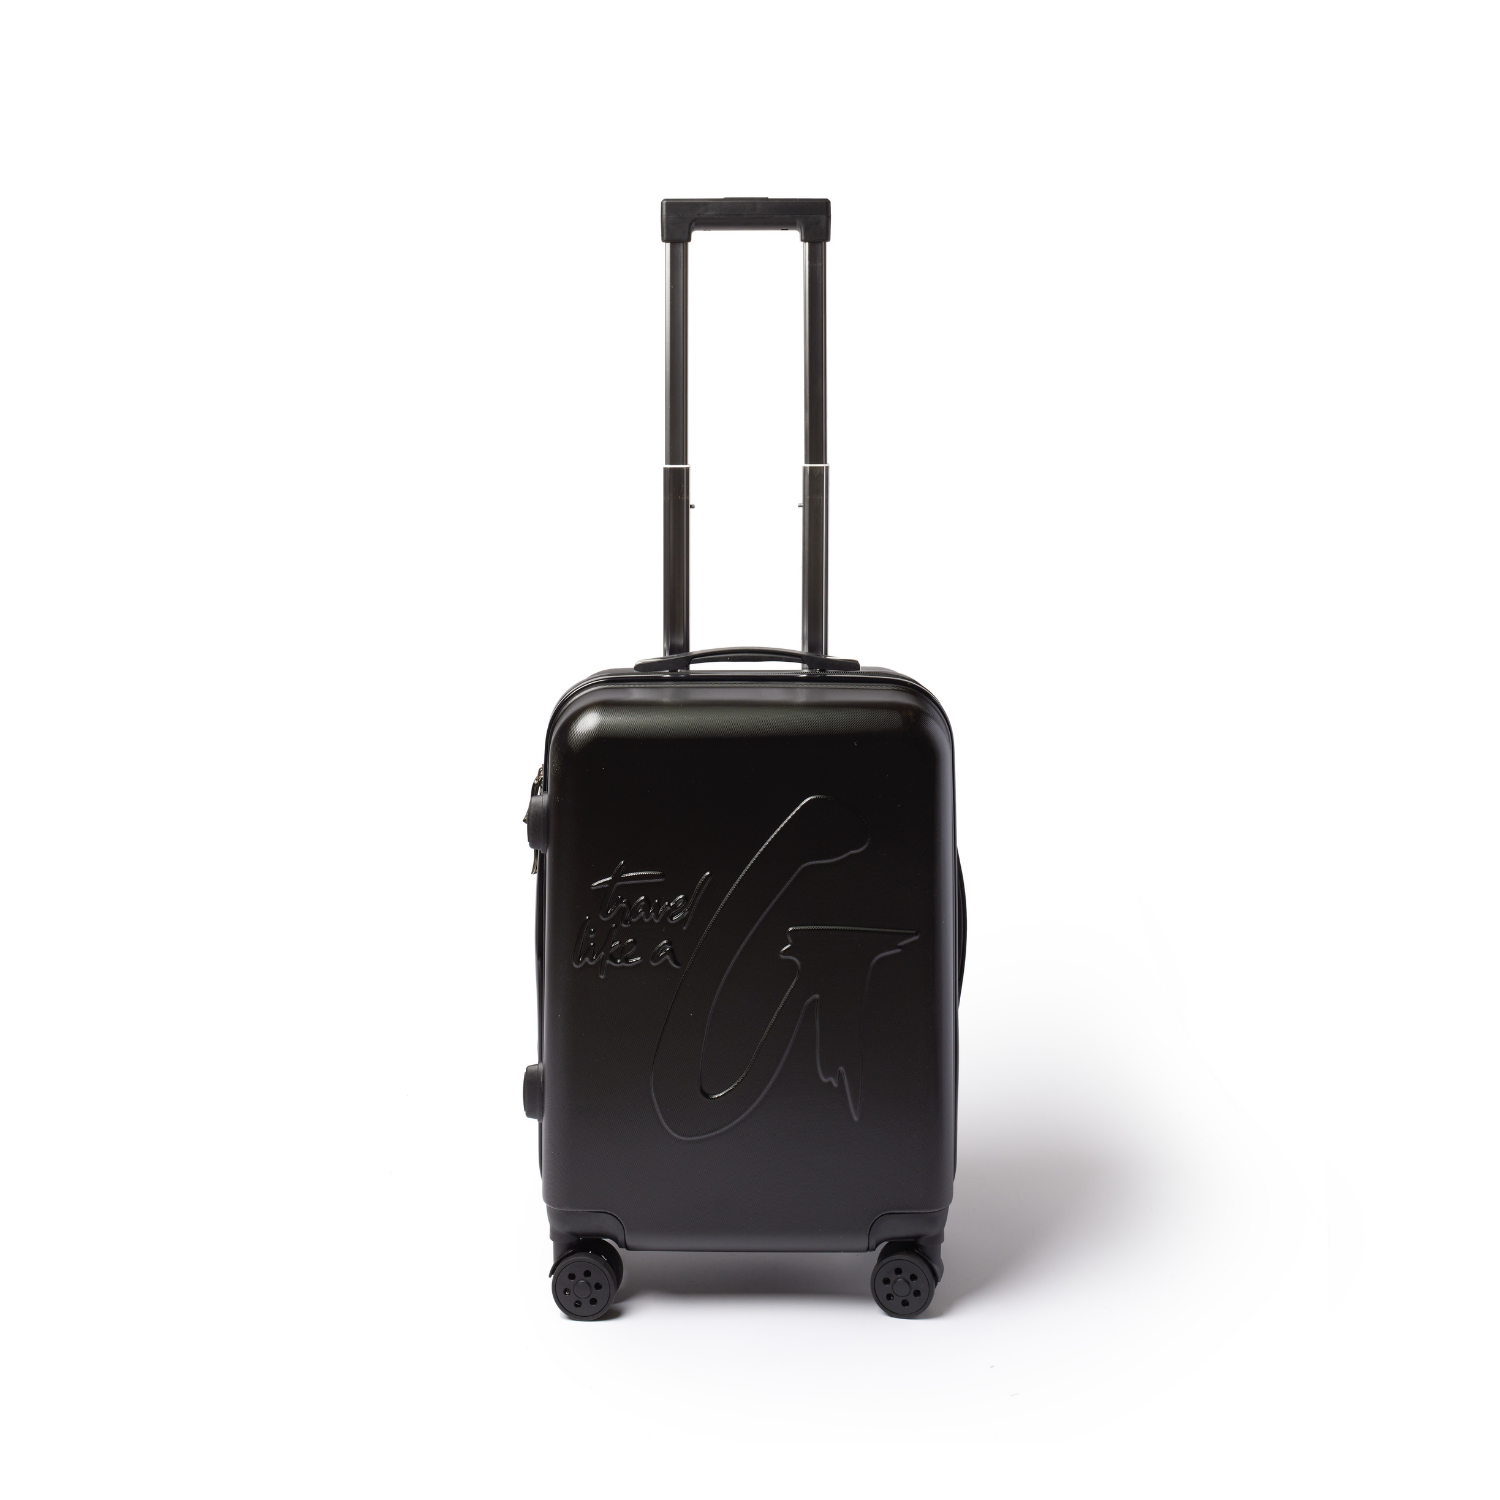 STANDARD CARRY-ON LUGGAGE BLACK